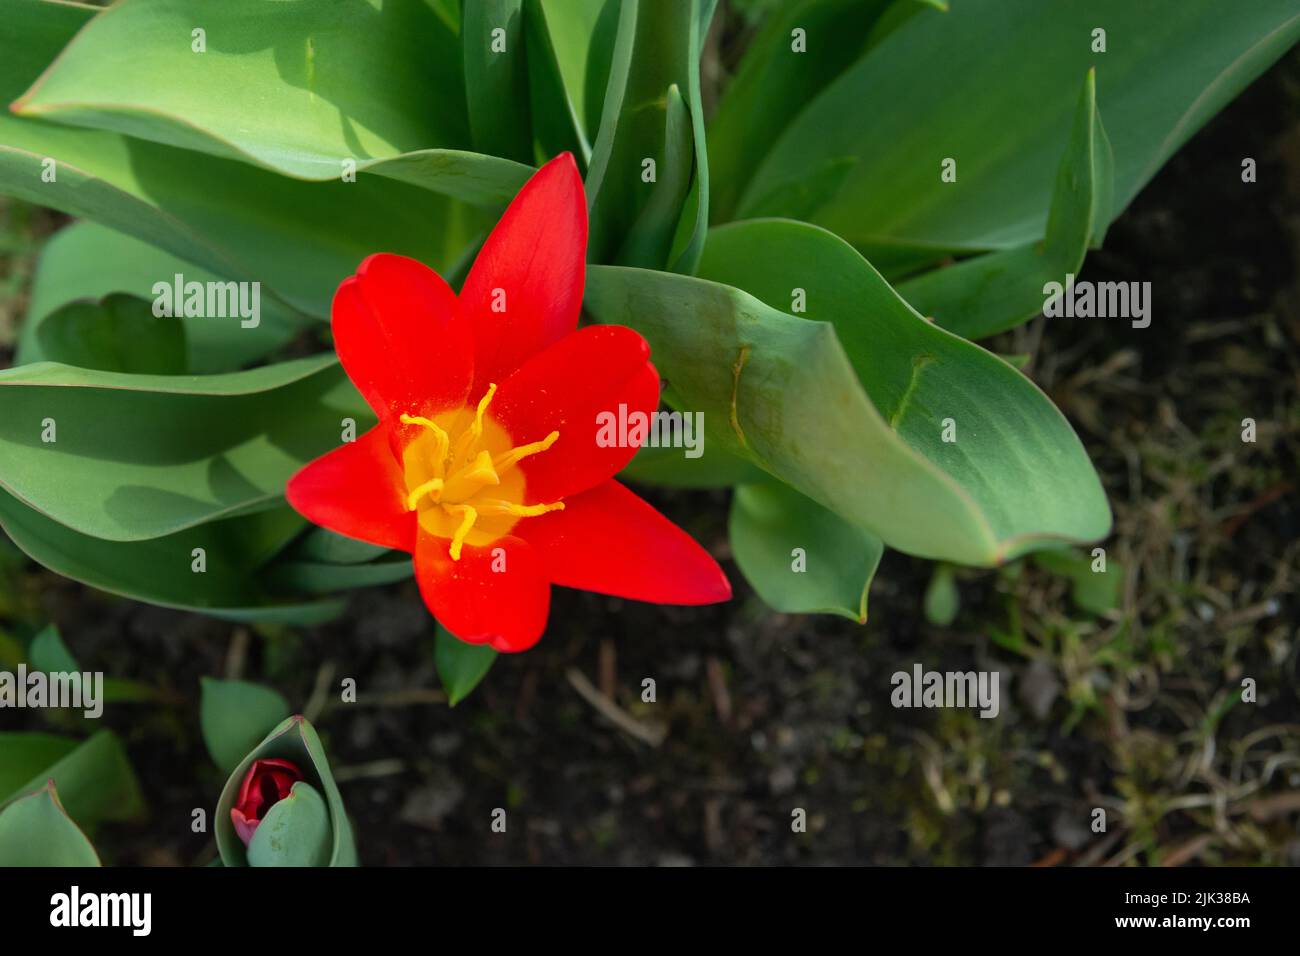 Red tulip with open petals, top view of the flower Stock Photo